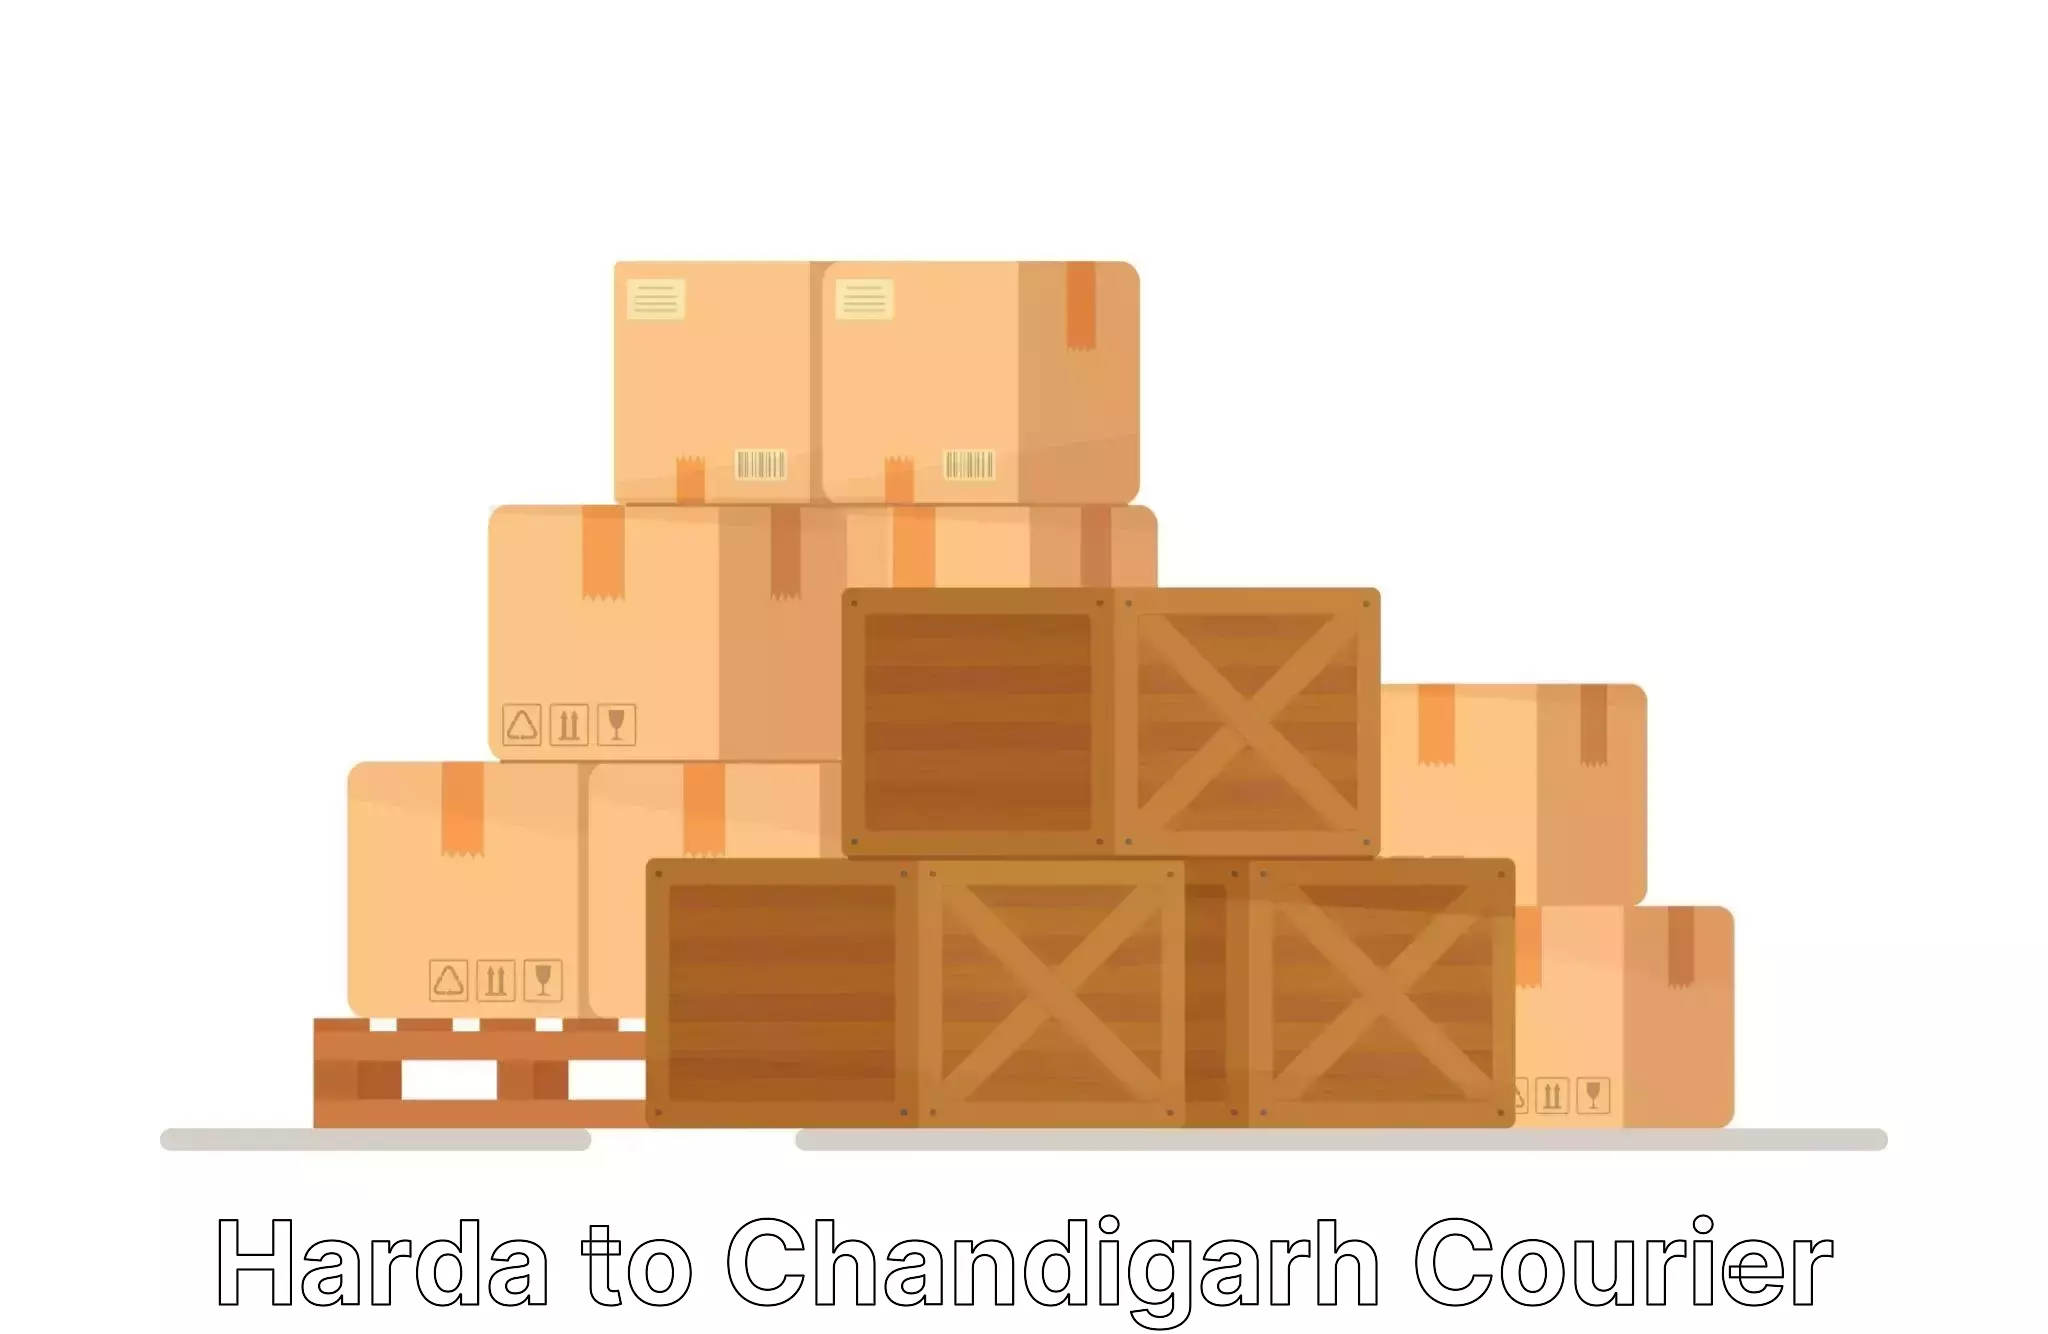 Home relocation experts Harda to Chandigarh